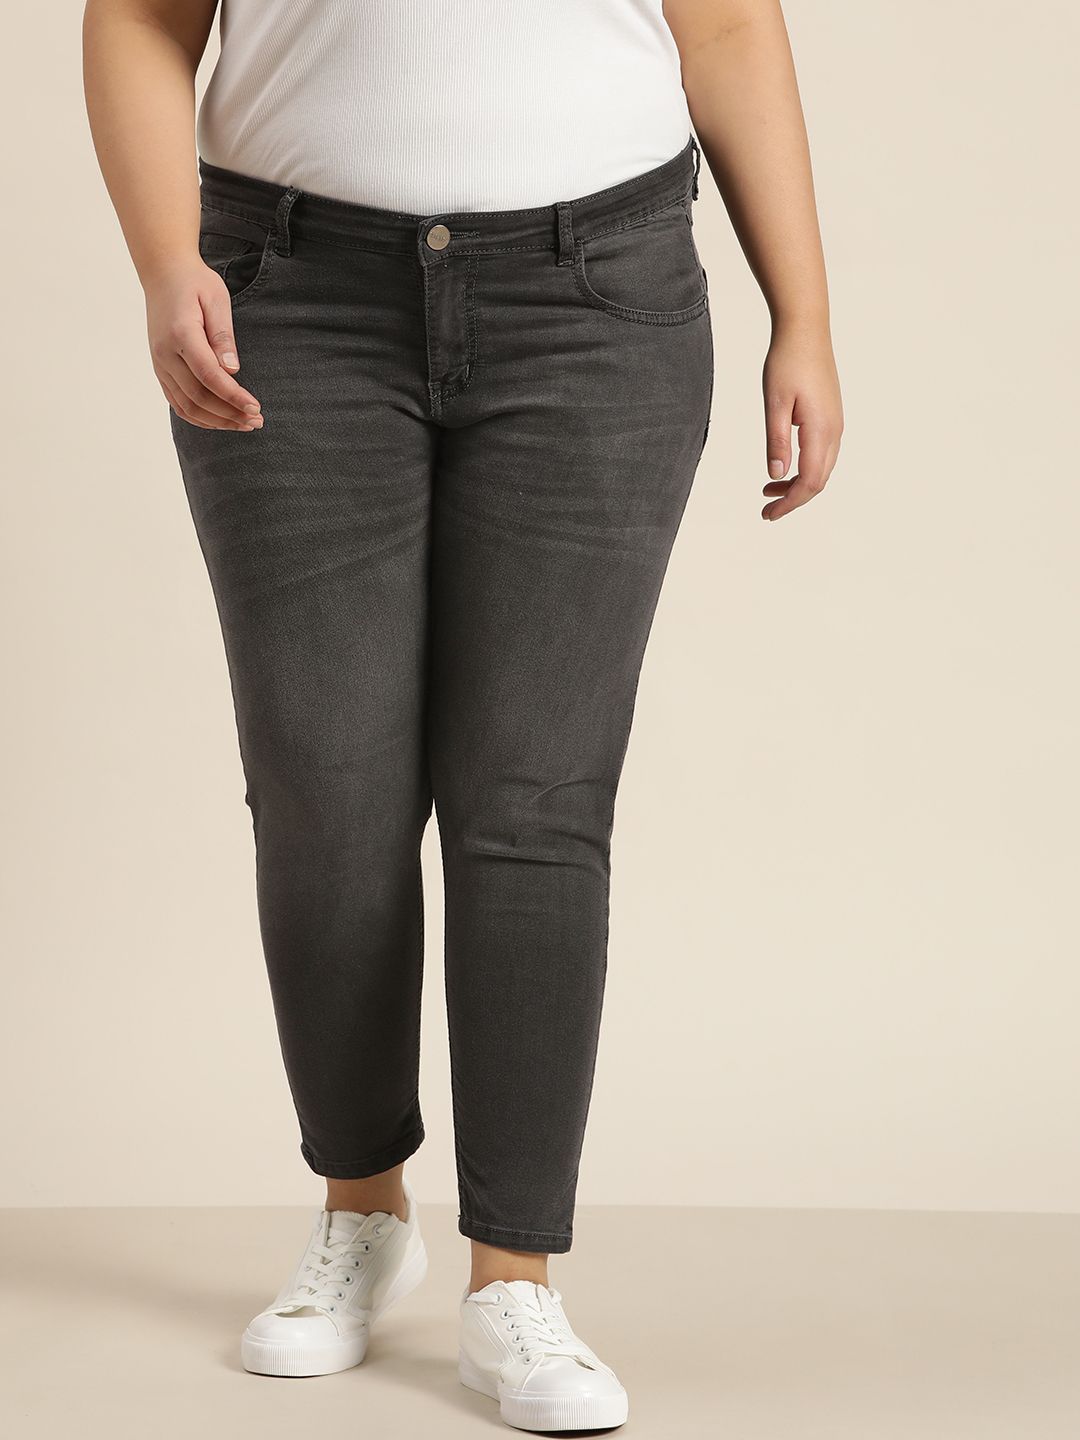 Sztori Women Plus Size Charcoal Grey Skinny Fit Light Fade Stretchable Jeans Price in India